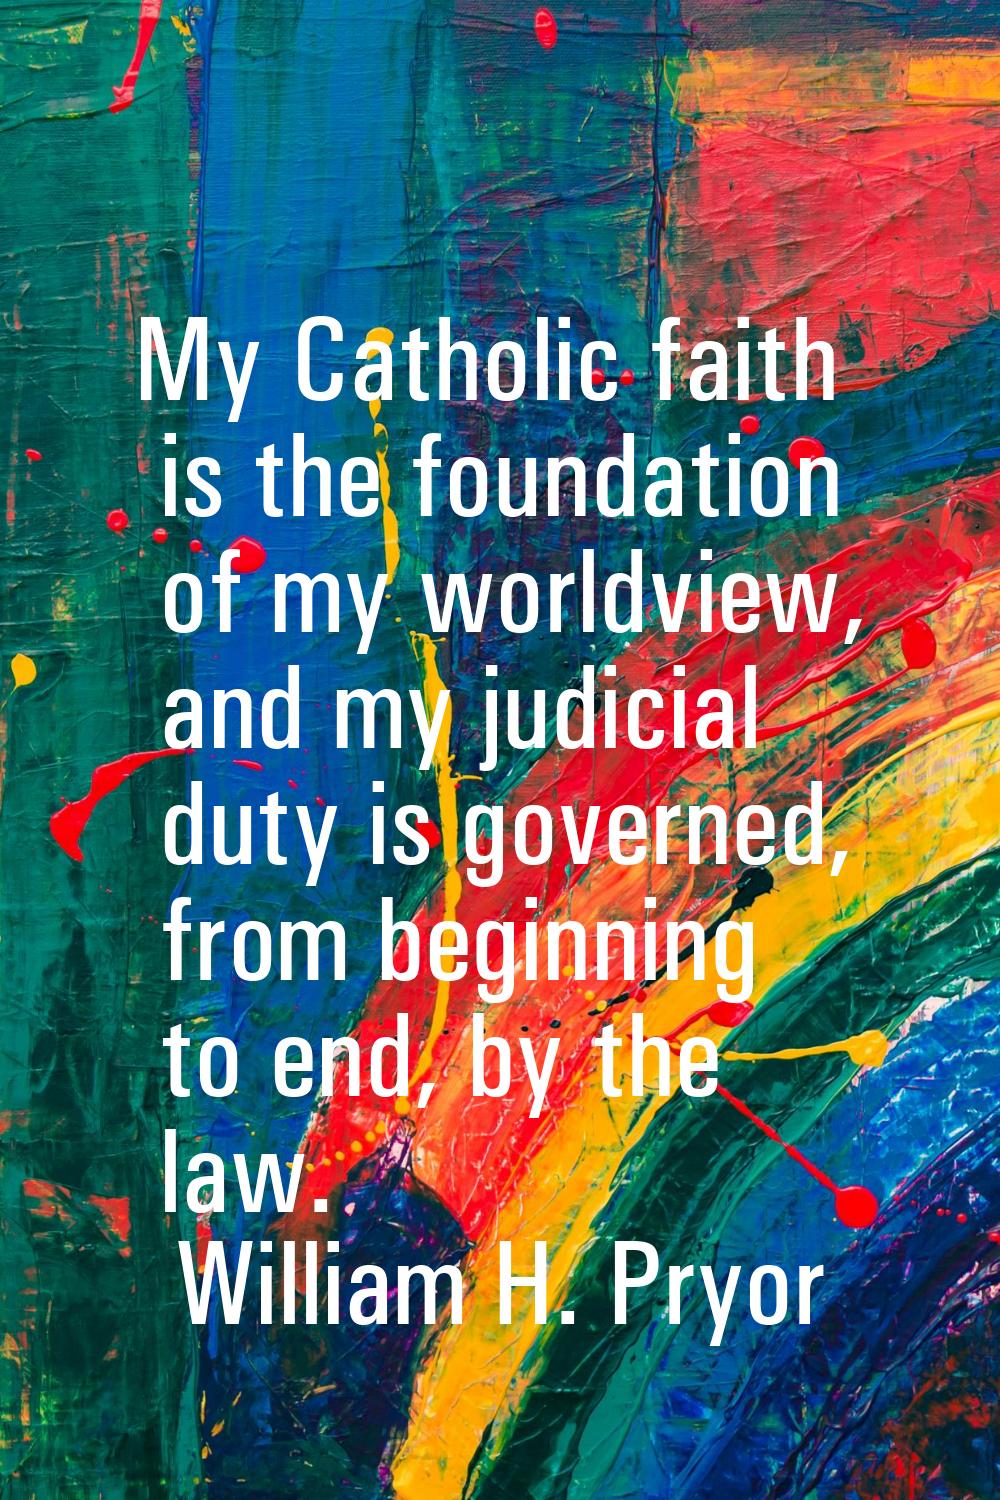 My Catholic faith is the foundation of my worldview, and my judicial duty is governed, from beginni